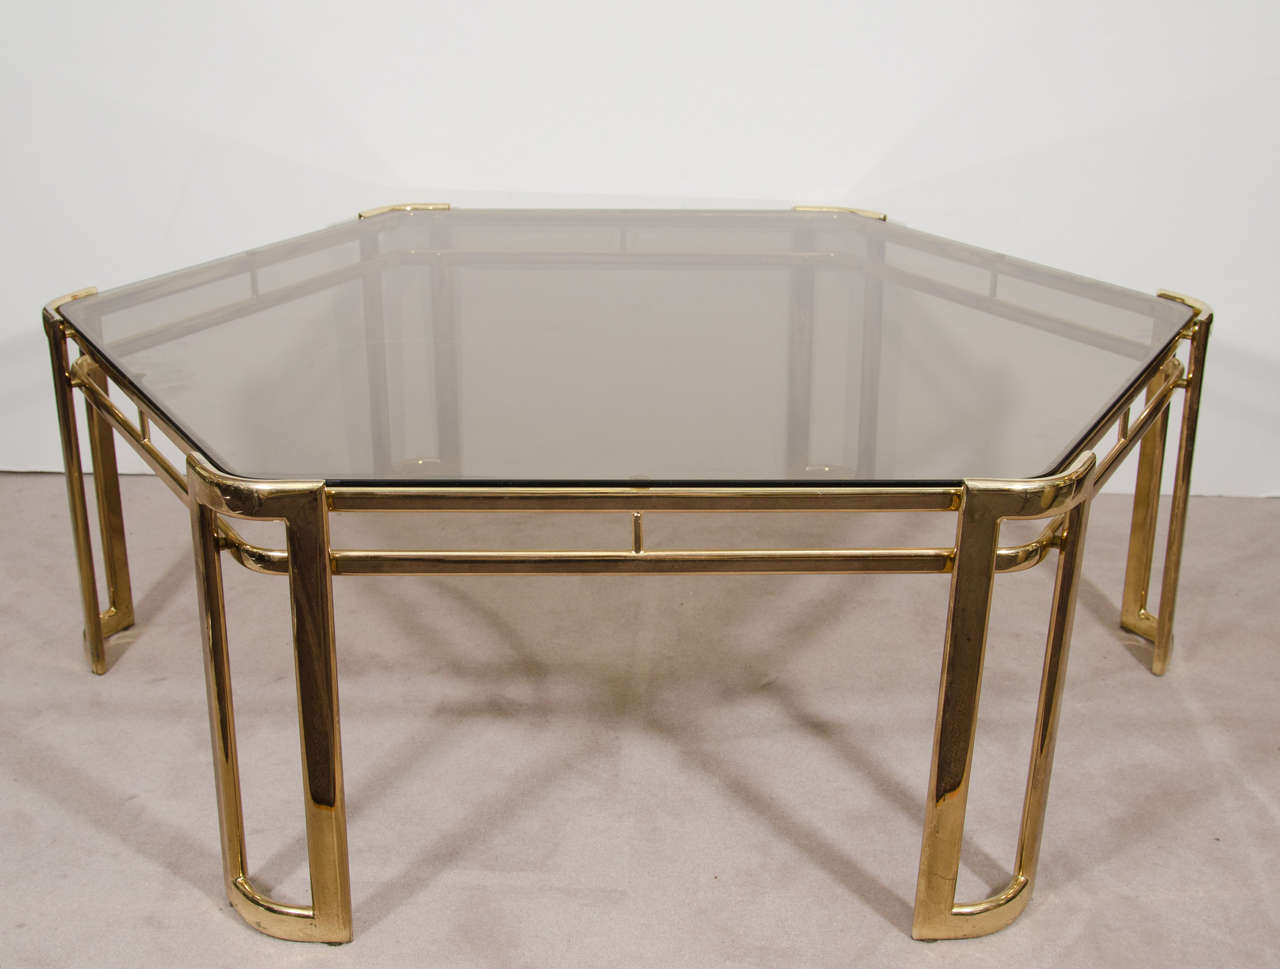 A vintage brass-plated and smoked glass hexagonal coffee or cocktail table. 

Good vintage condition with age appropriate wear and patina. One faint scratch to glass.